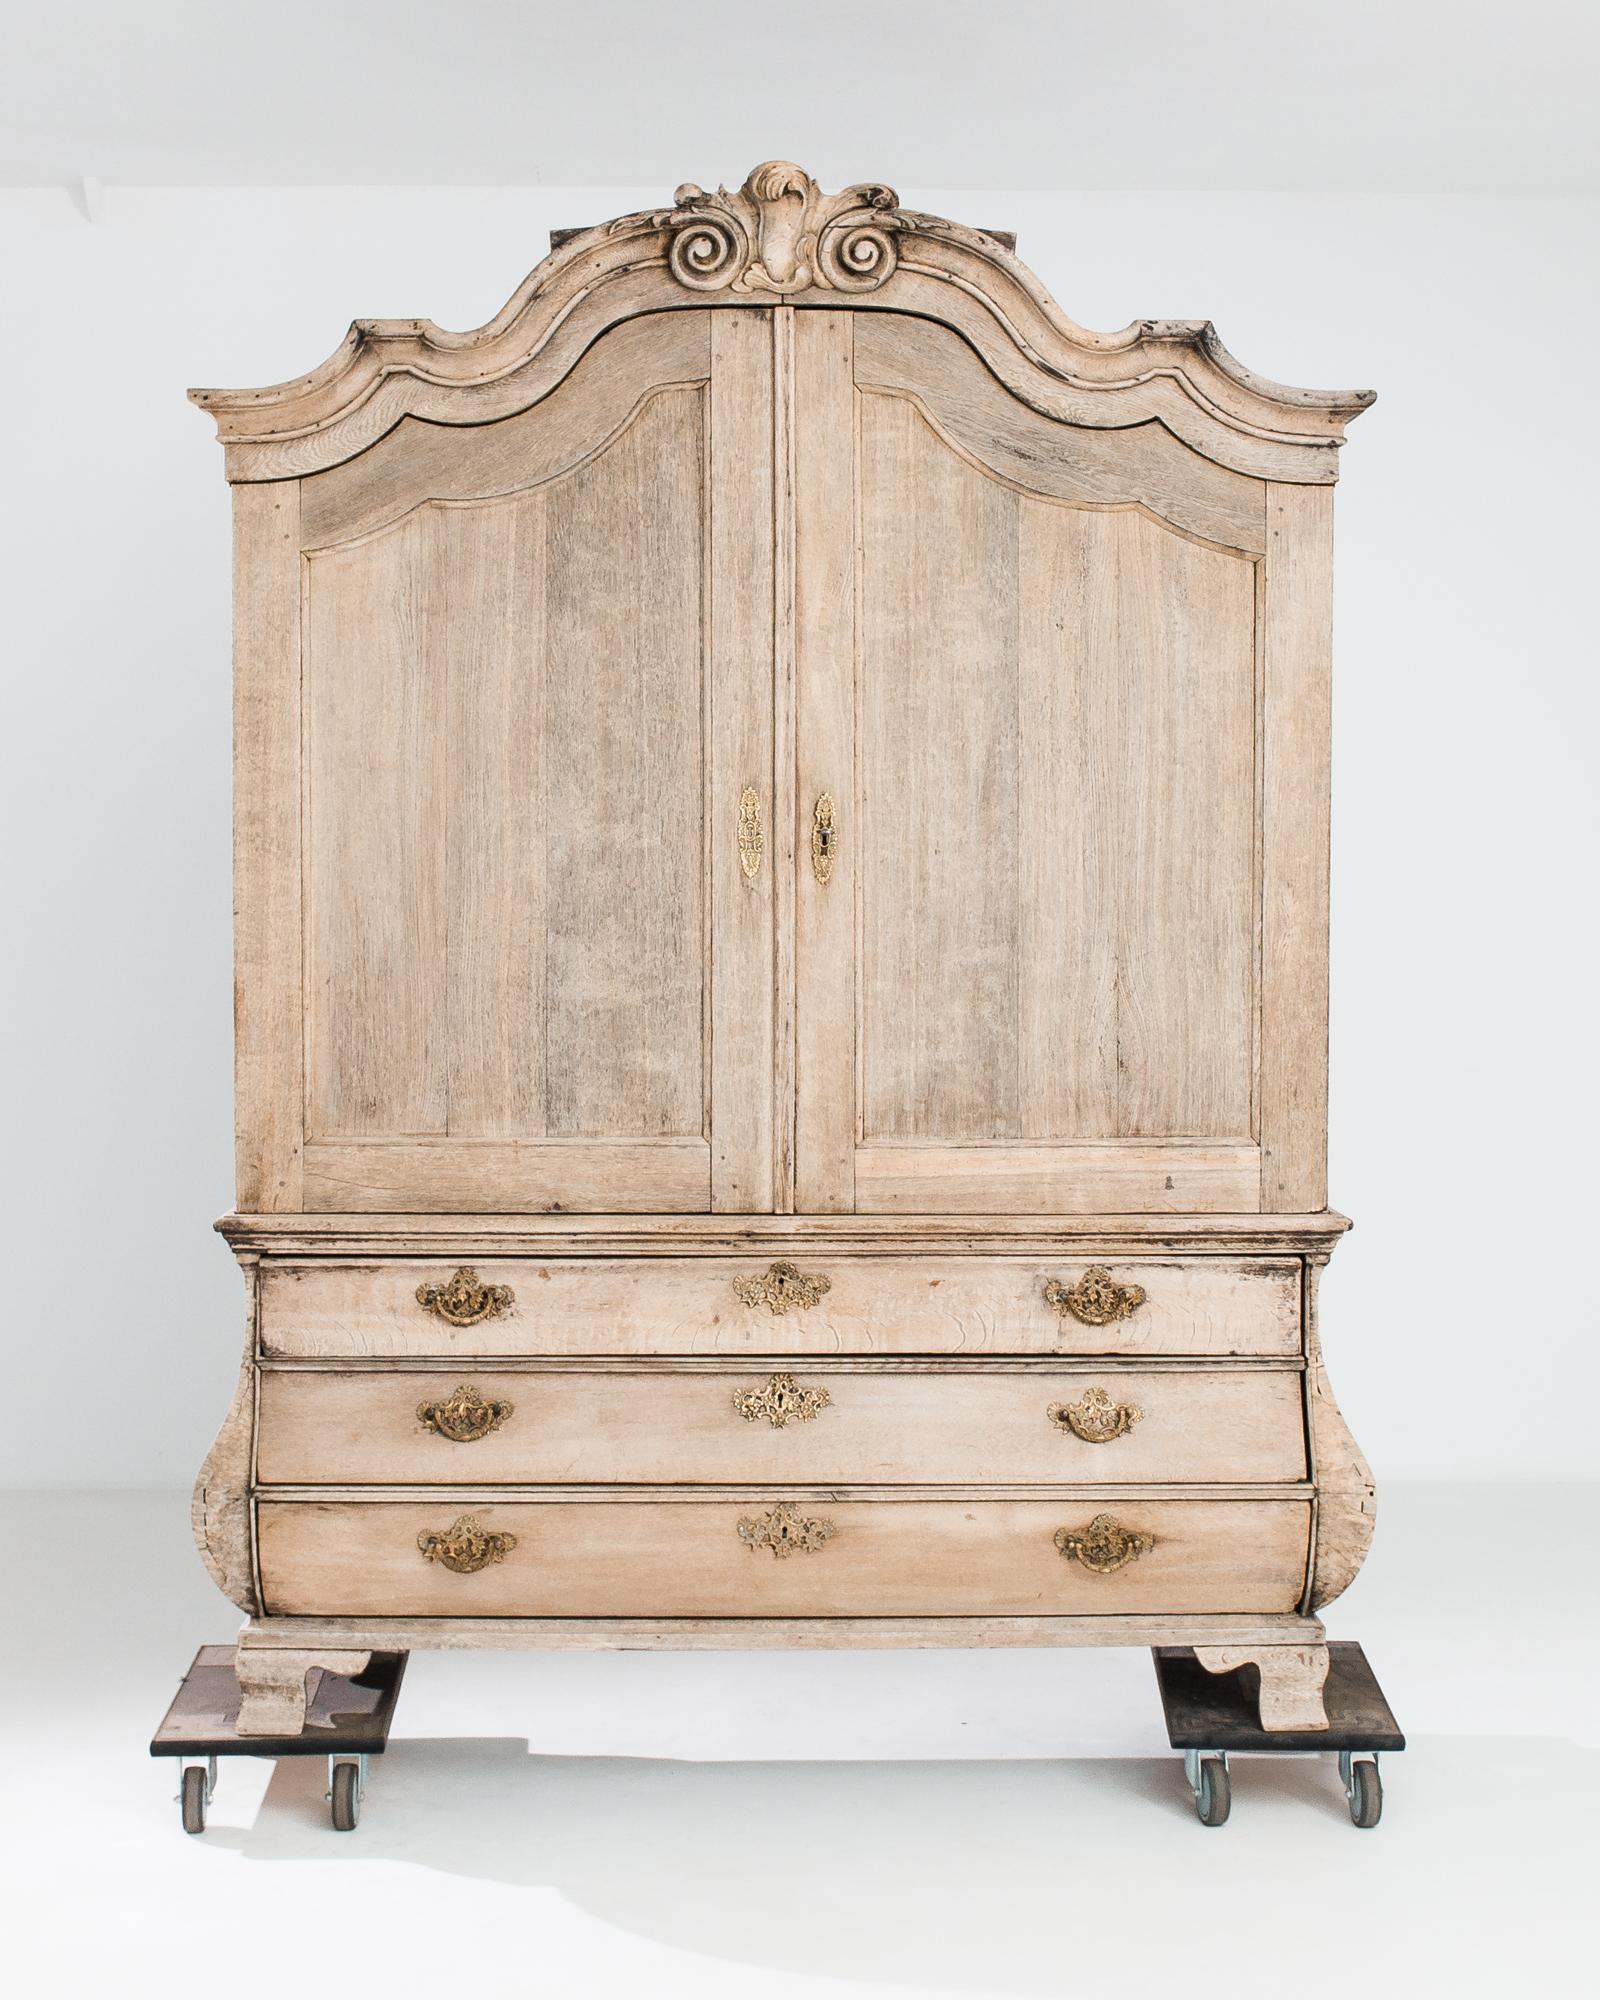 This antique bleached oak cabinet was crafted in the Netherlands, circa 1780. The upper cabinet features four shelves, lodged on a three drawer chest and ogee bracket feet. An arrangement of five hidden drawers allows for discrete closed storage.